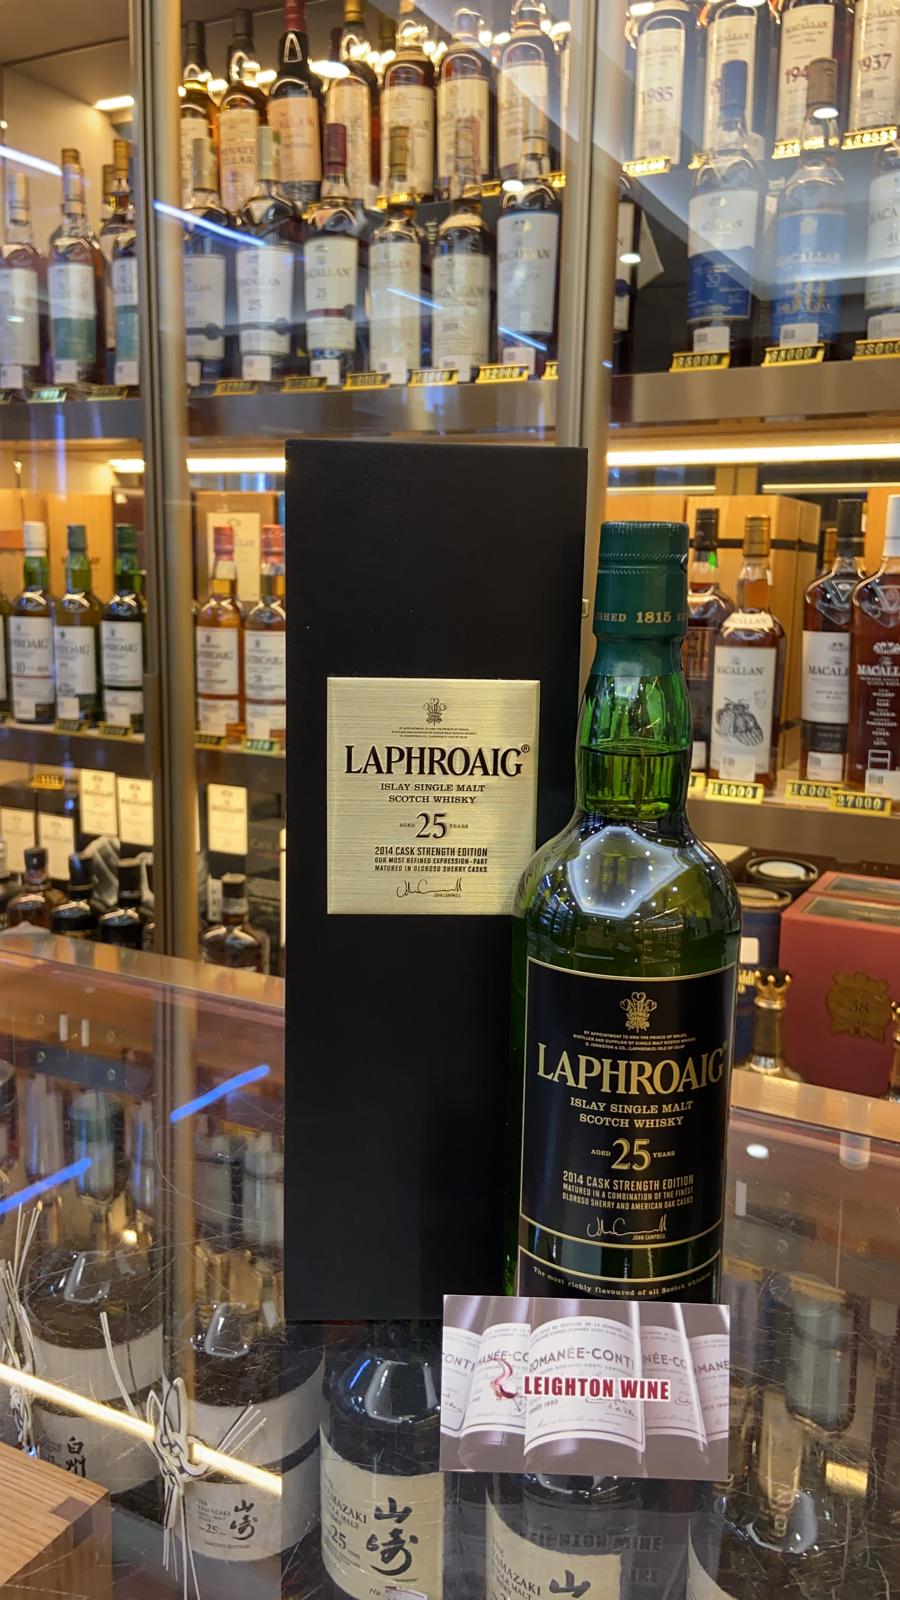 Laphroaig 25 Year Old Cask Strength (2014 Release) (70cl, 45.1%)